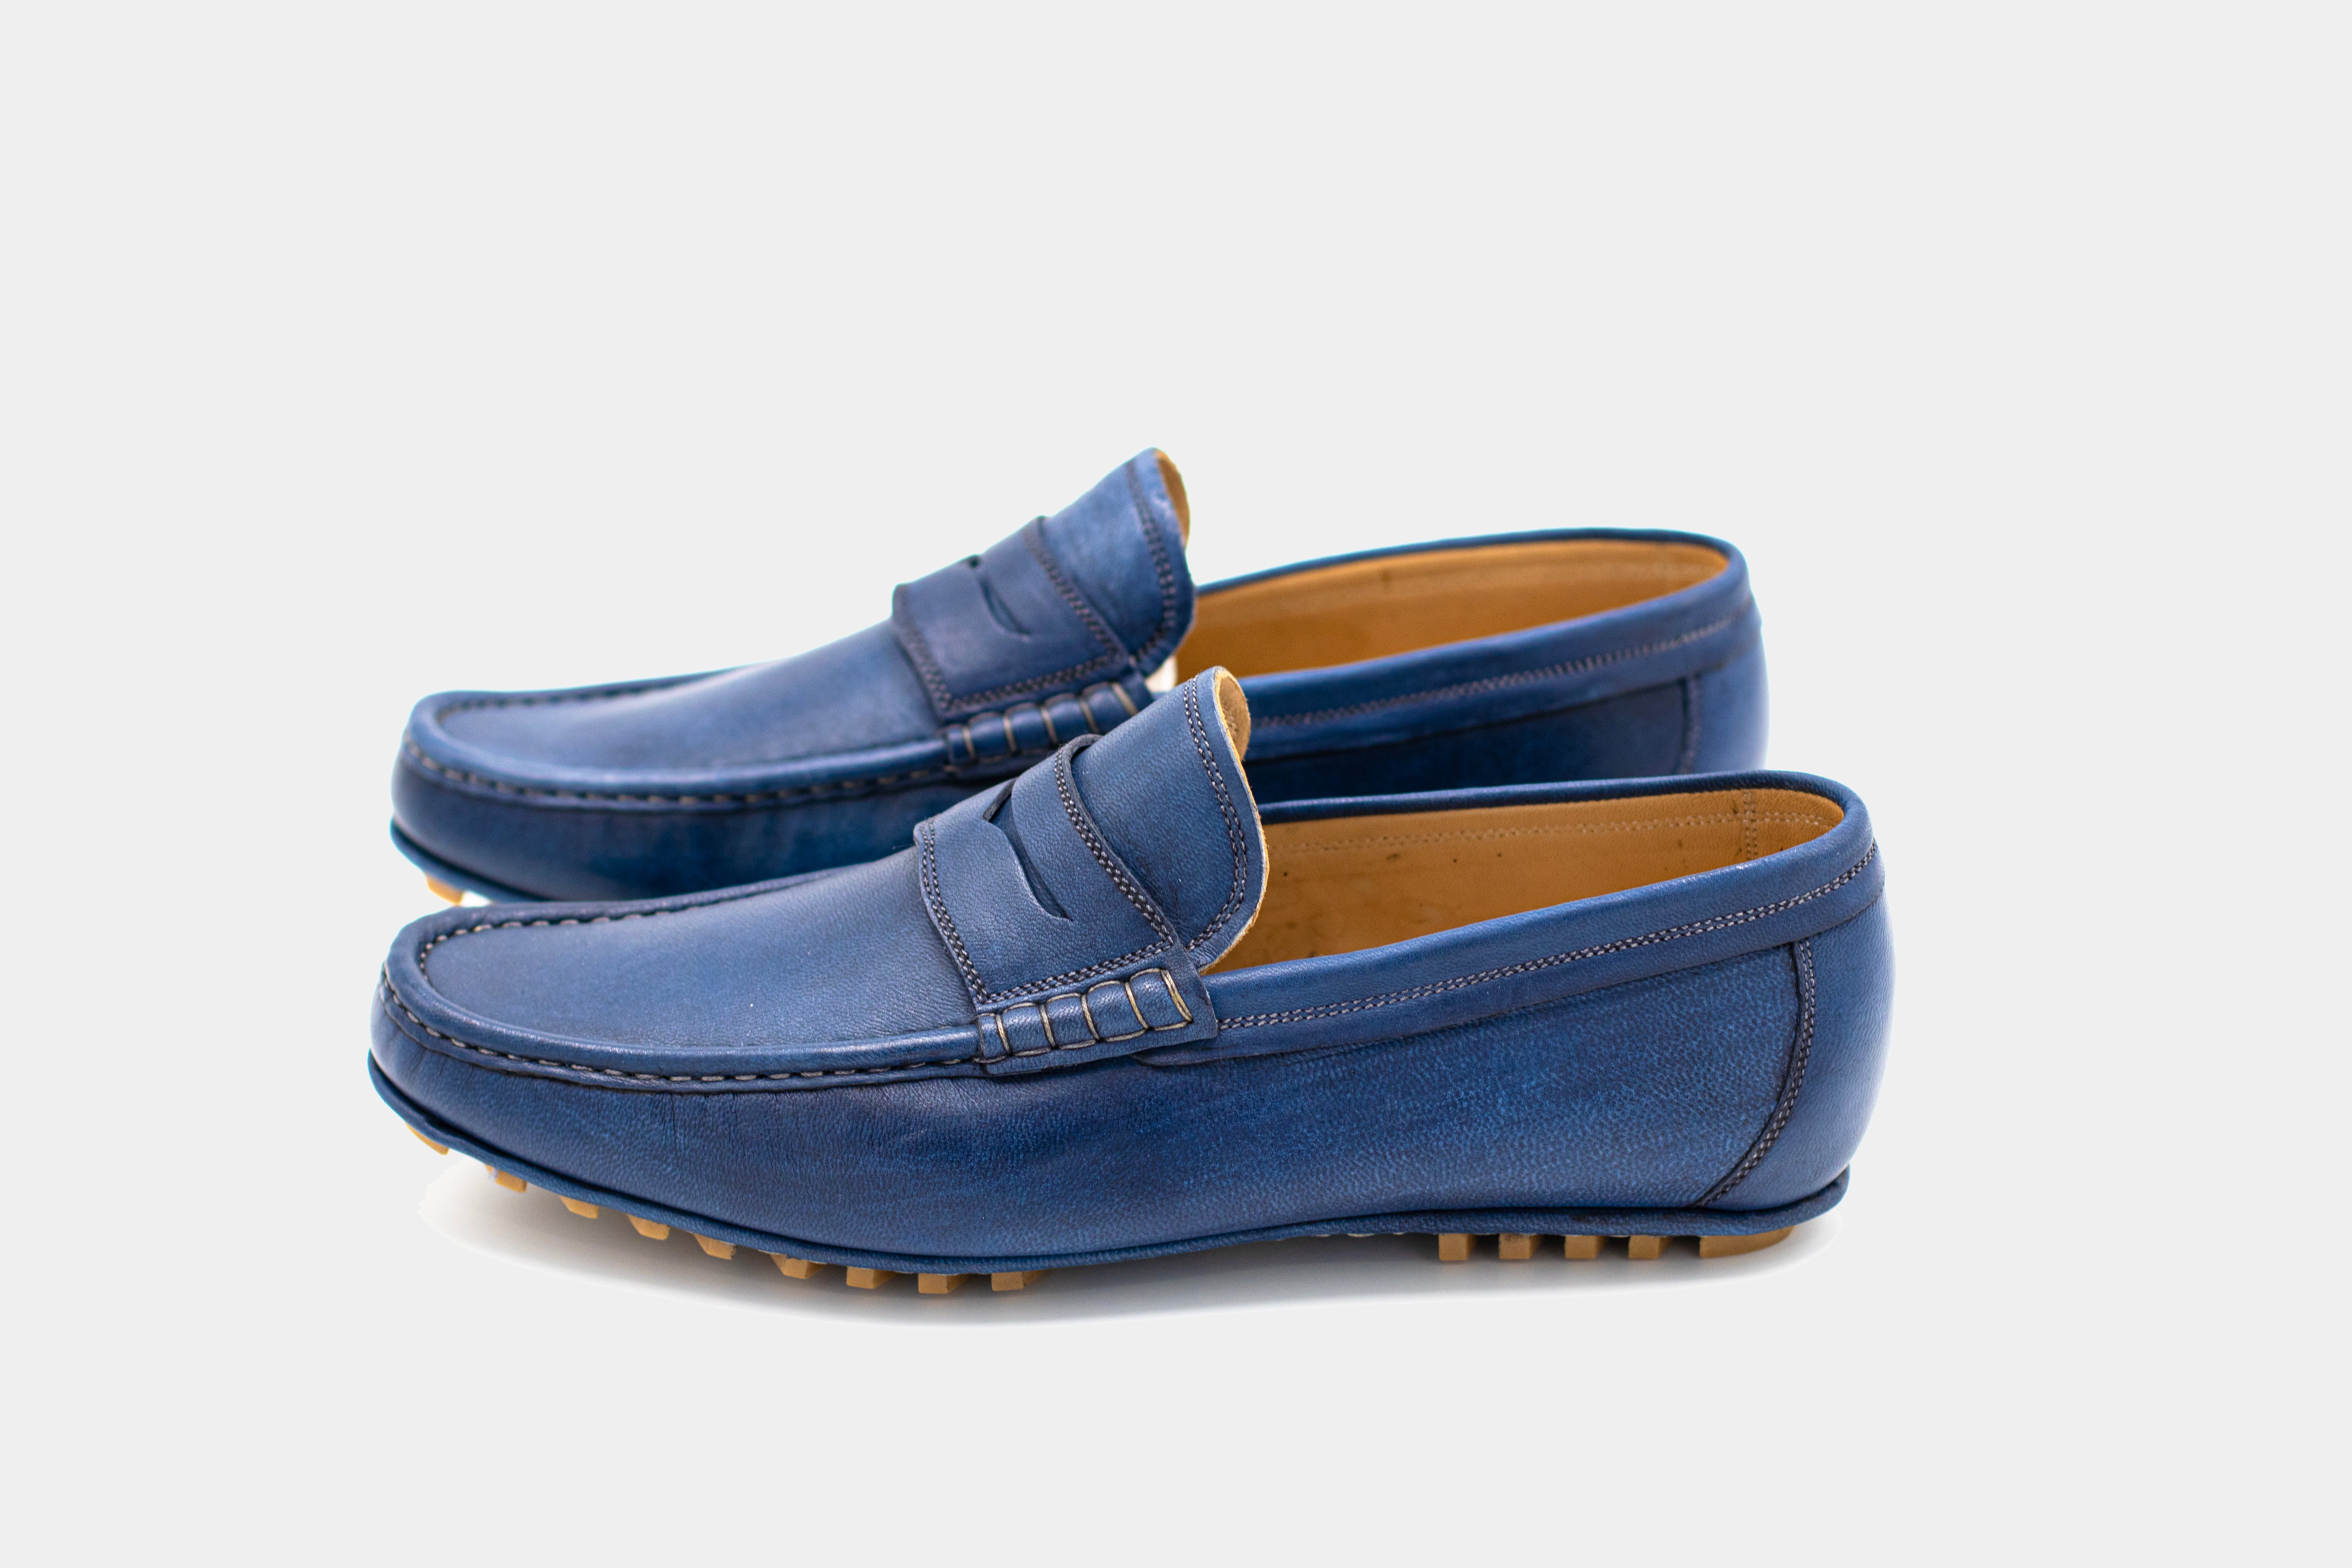 Parlanti Men's Loafers